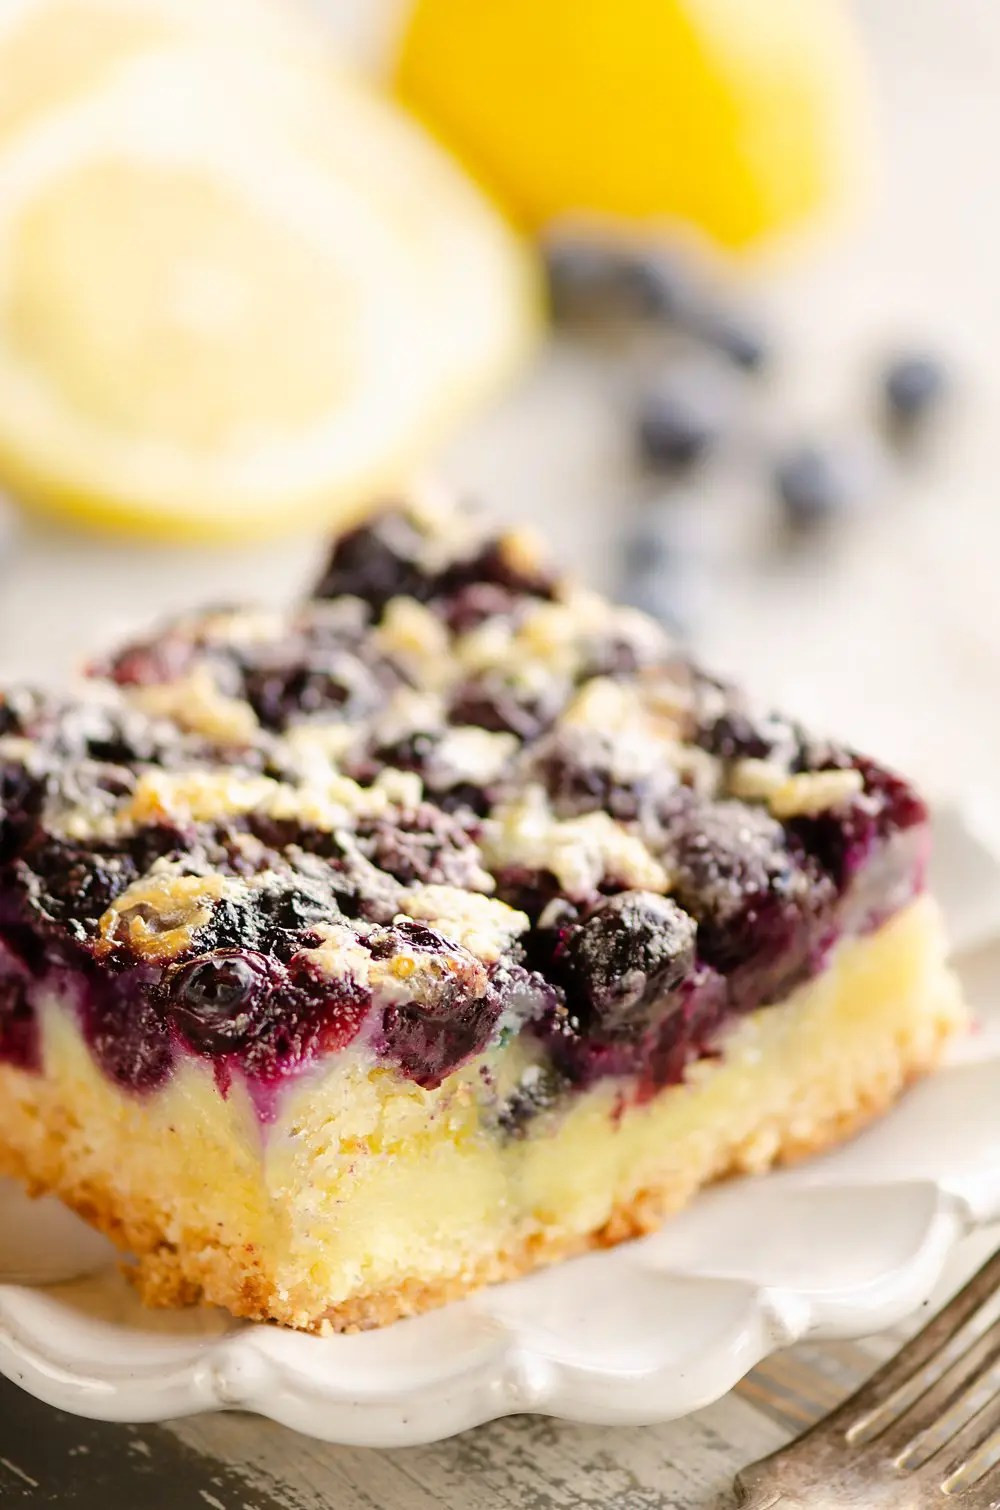 Don’t Miss Our 15 Most Shared Healthy Blueberry Desserts